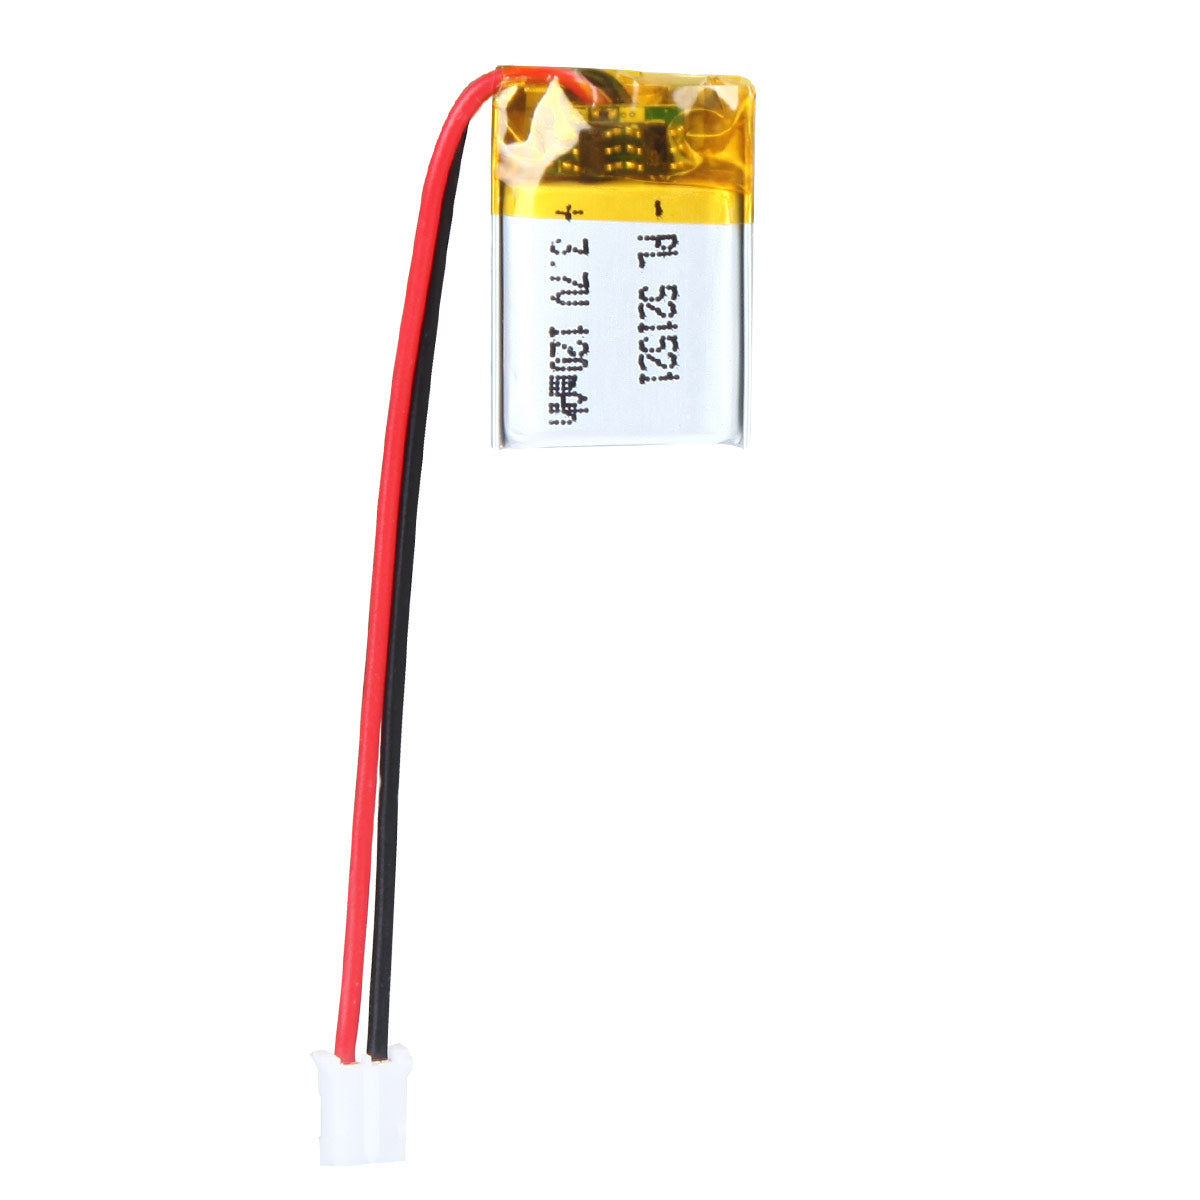 YDL 3.7V 120mAh 521521 Rechargeable Lithium Polymer Battery Length 23mm